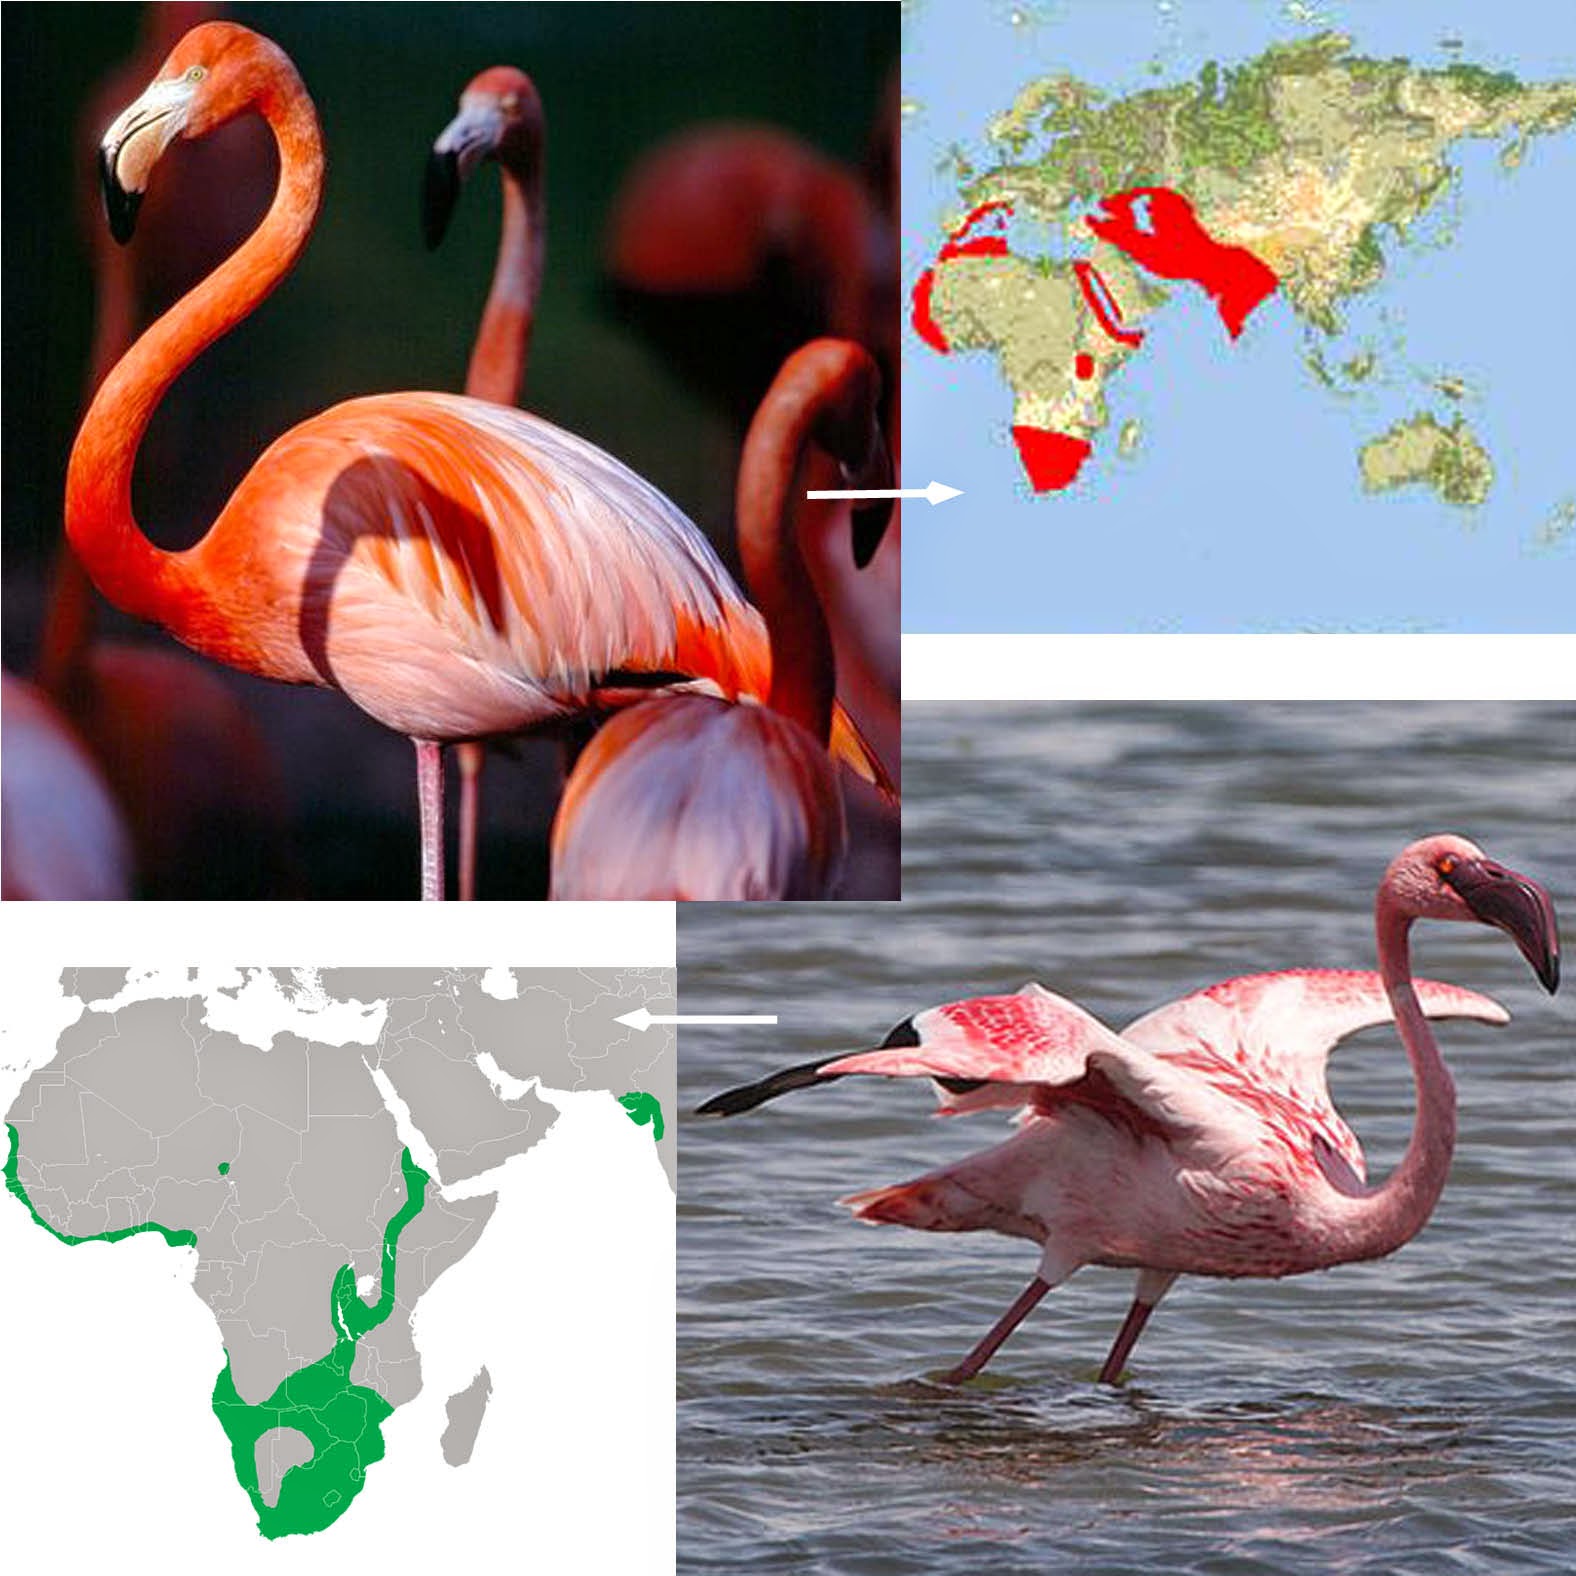 Where is the flamingo in the food chain?